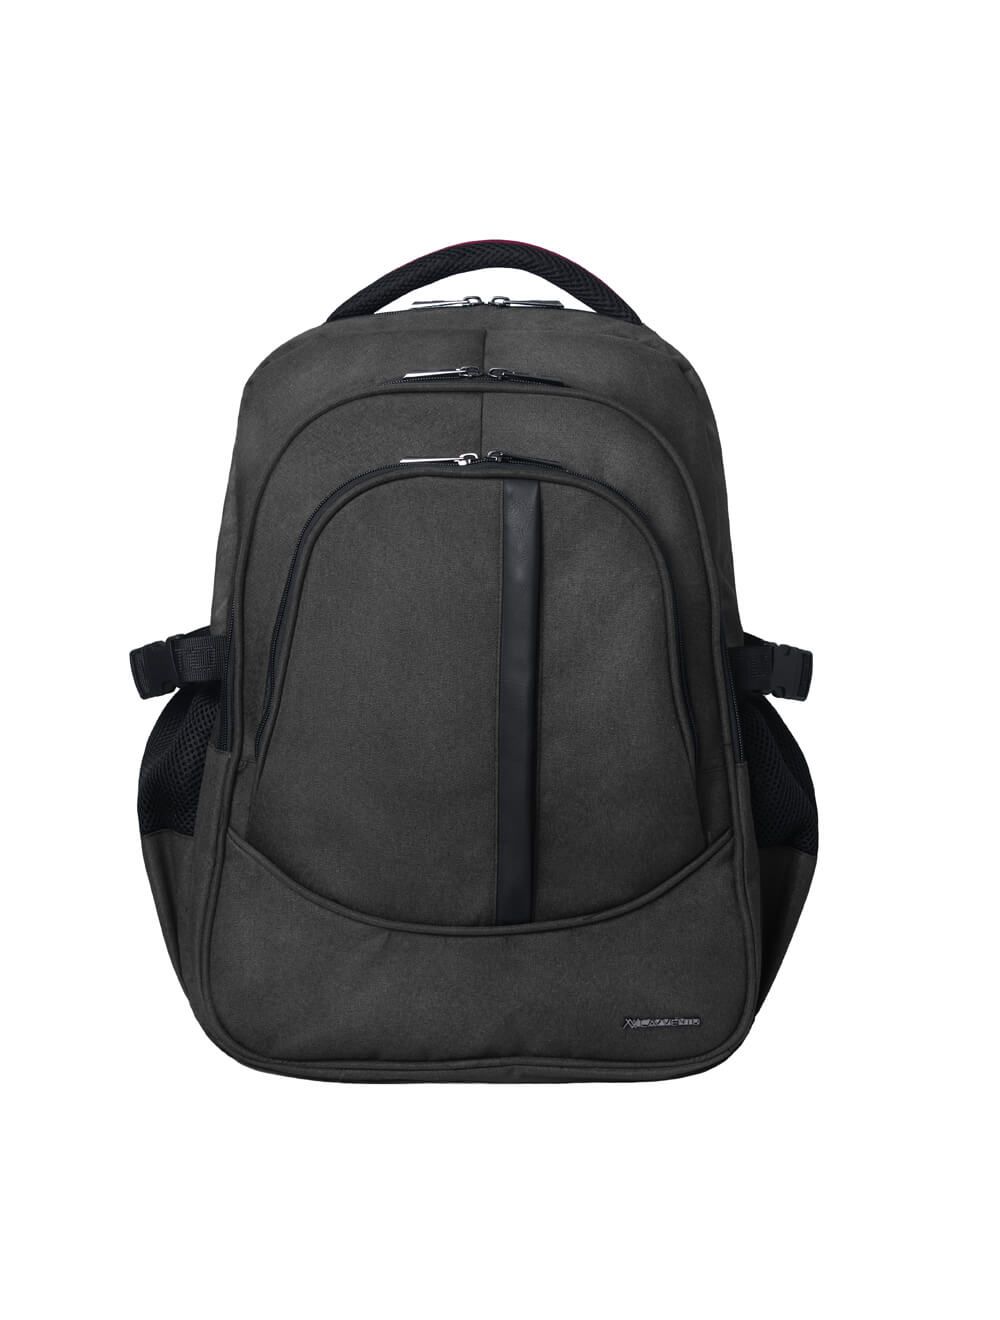 L'AVVENTO (BG74D) Discovery Backpack fit with Laptops up to 15.6